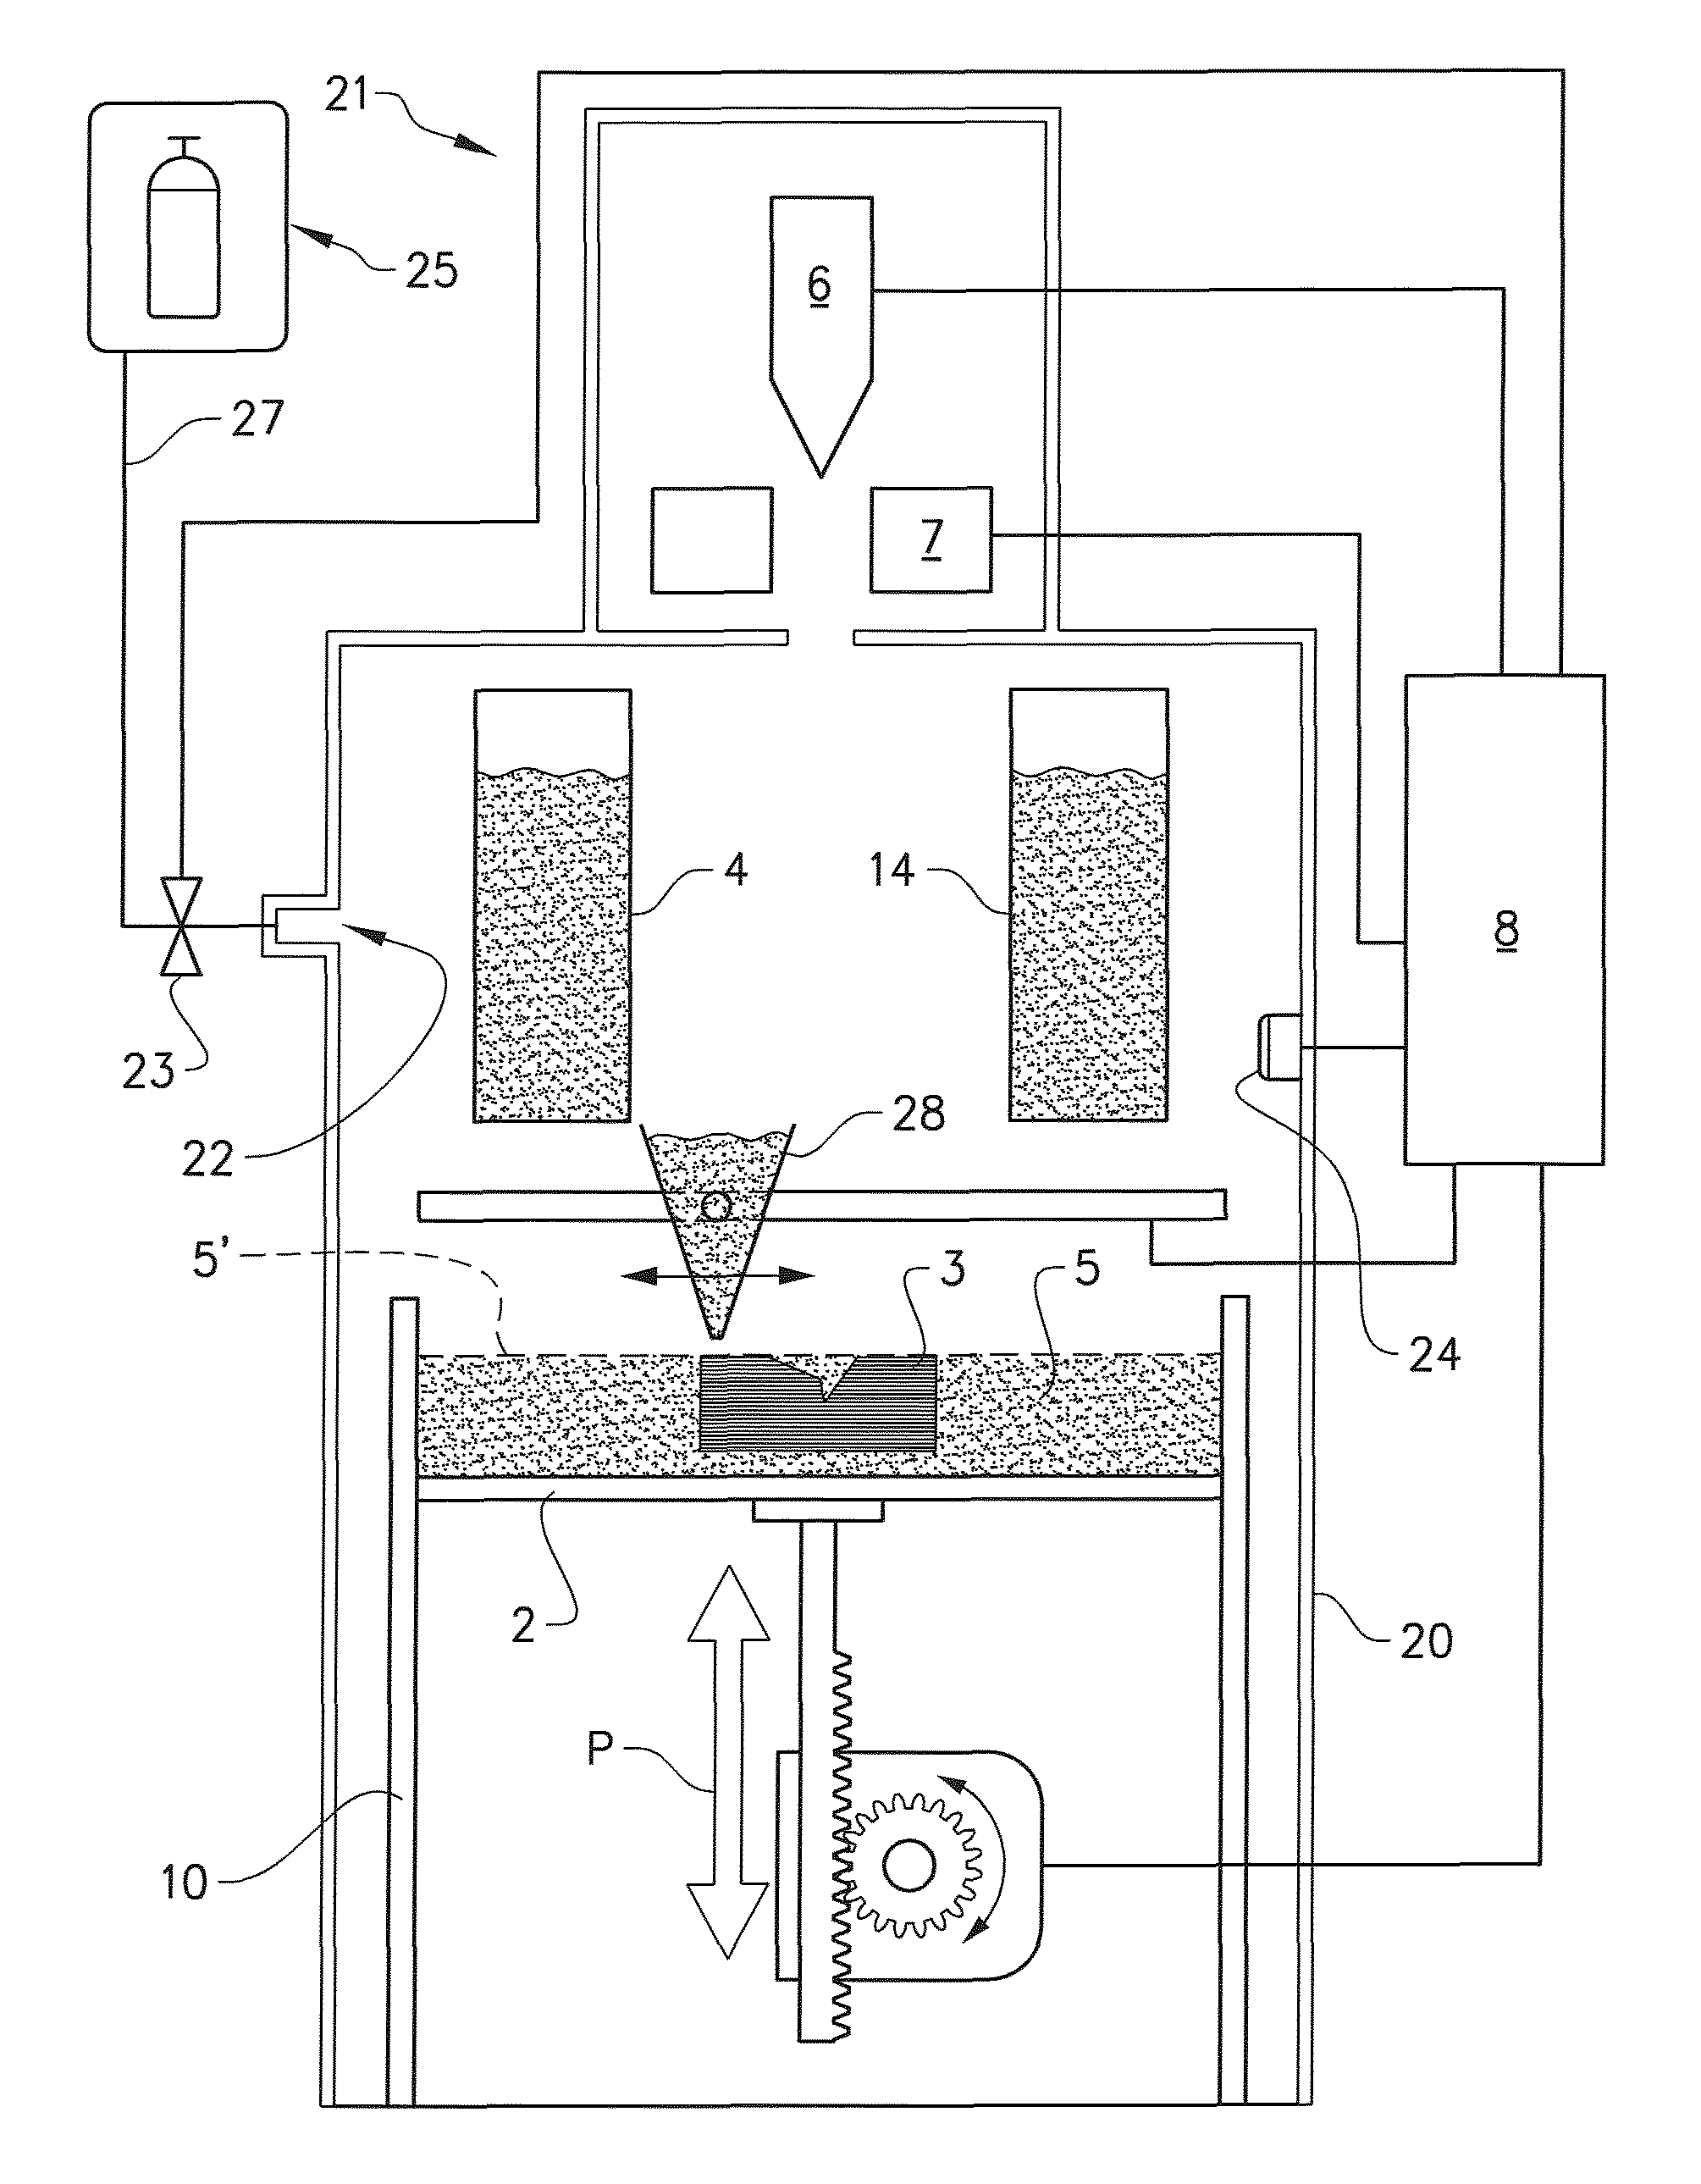 Method and apparatus for increasing the resolution in additively manufactured three-dimensional articles